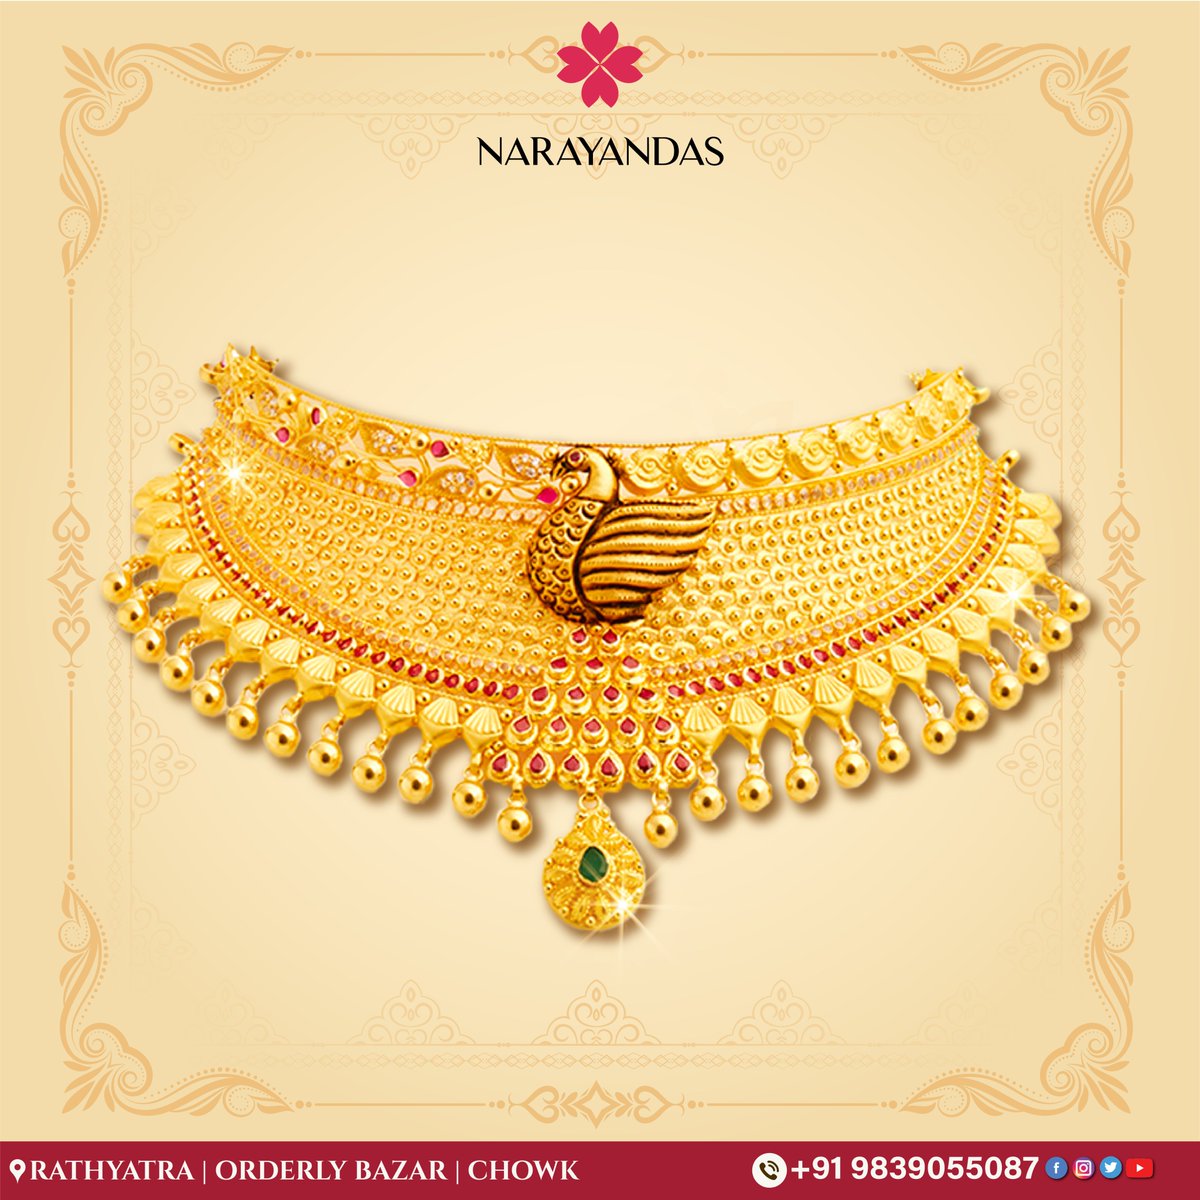 Our choker sets are designed to draw attention and win hearts as a celebration of the beauty of your neckline.
*
Visit our nearby store in Varanasi to book now!.

#ChokerElegance
#NecklaceGlam
#CharmAndGrace
#OpulentAdornments
#elegancedefined 
#narayandasjewellers